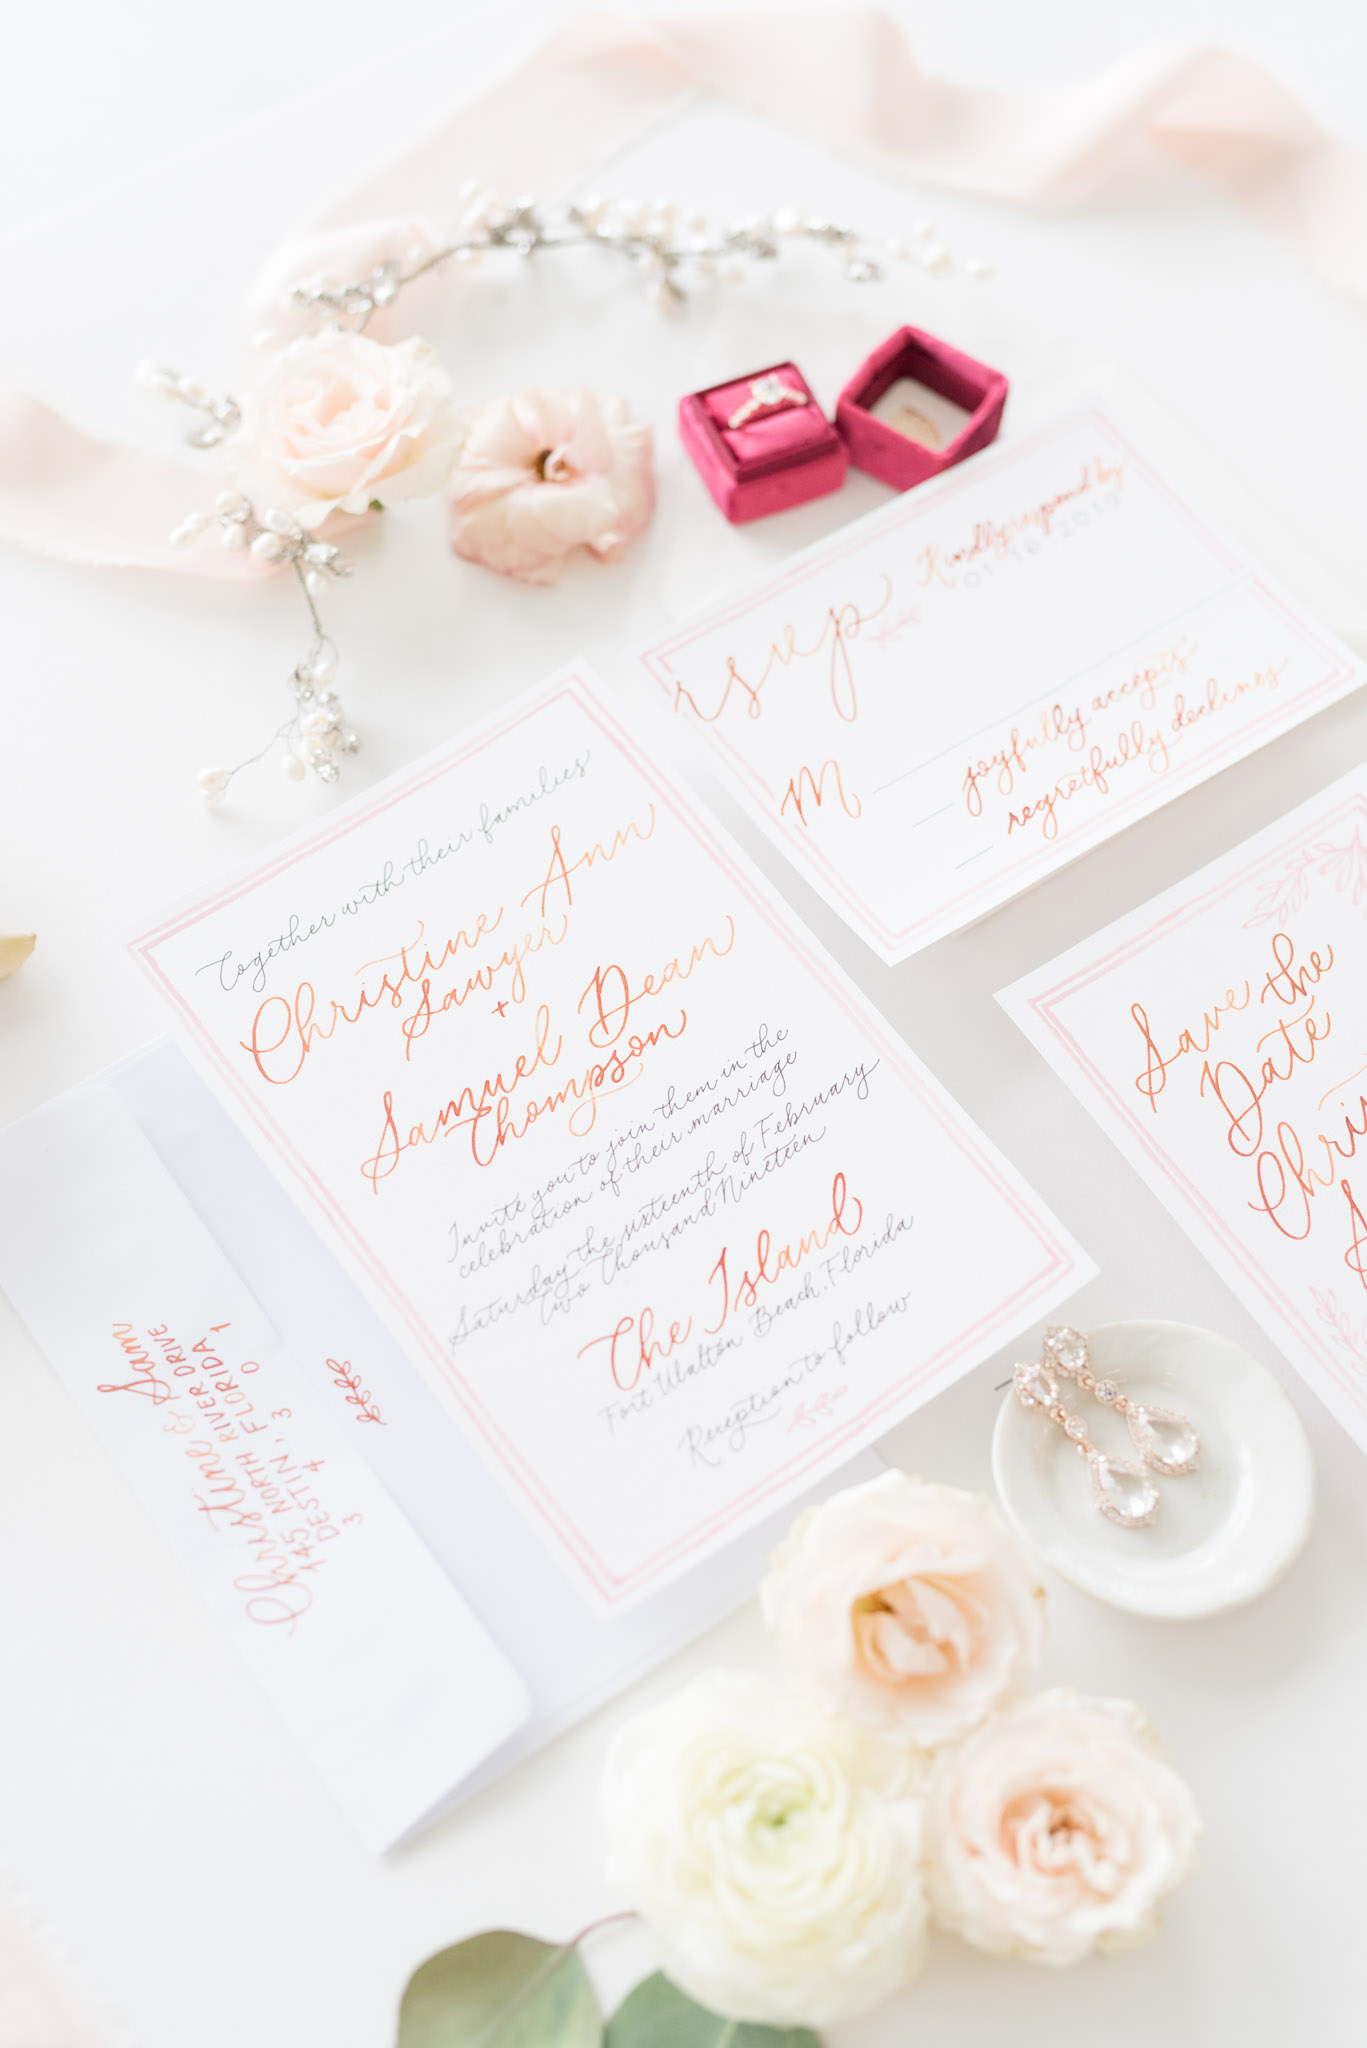 Blush and white wedding invitations and ring.